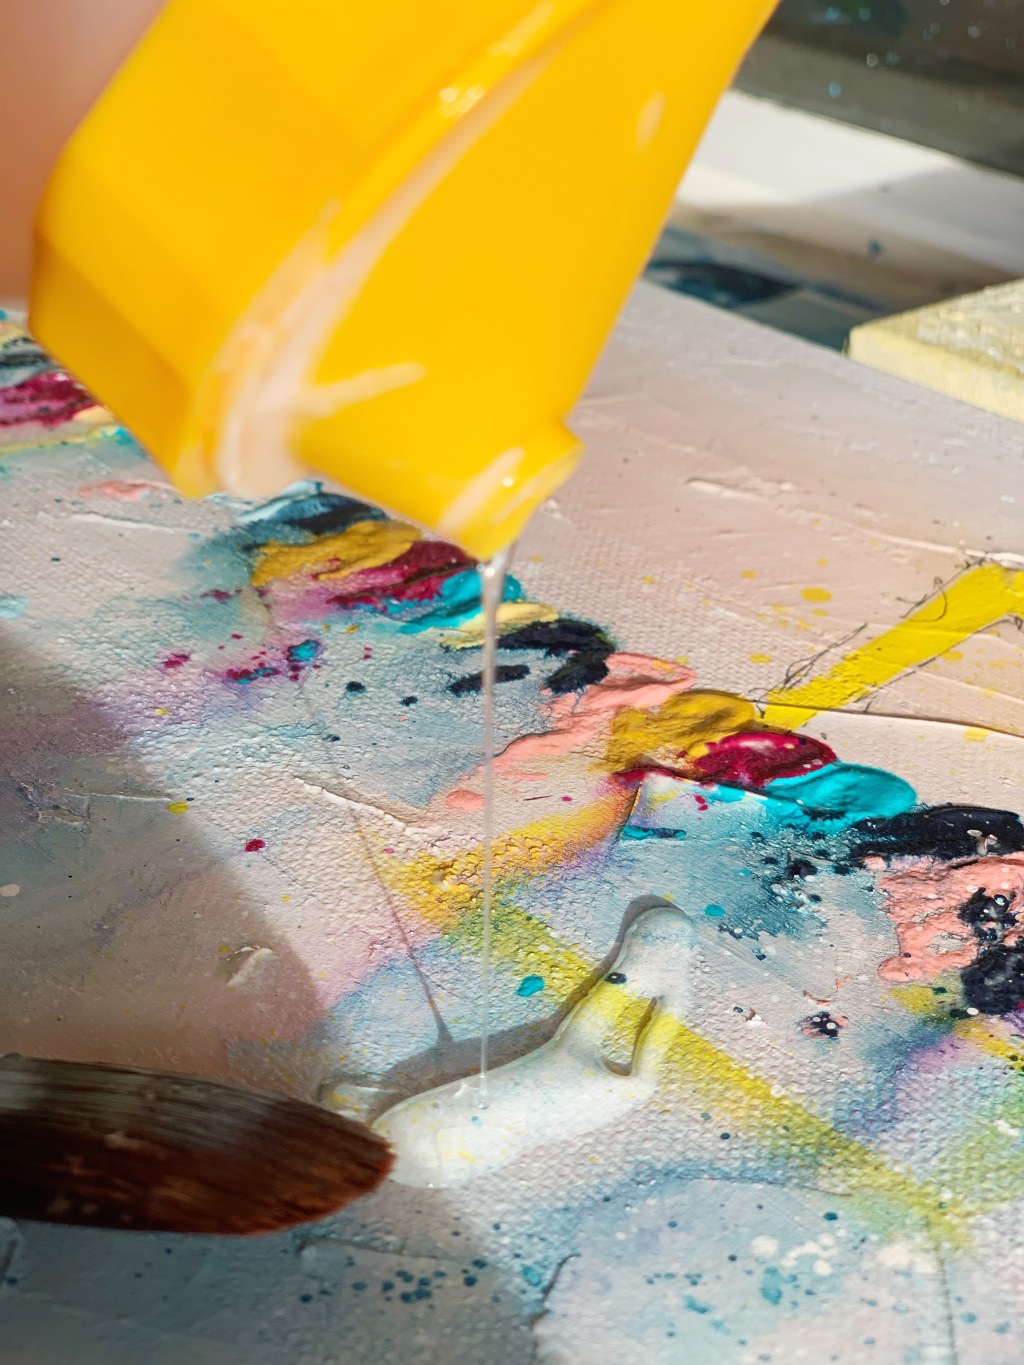 How Varnish Protects Your Artwork